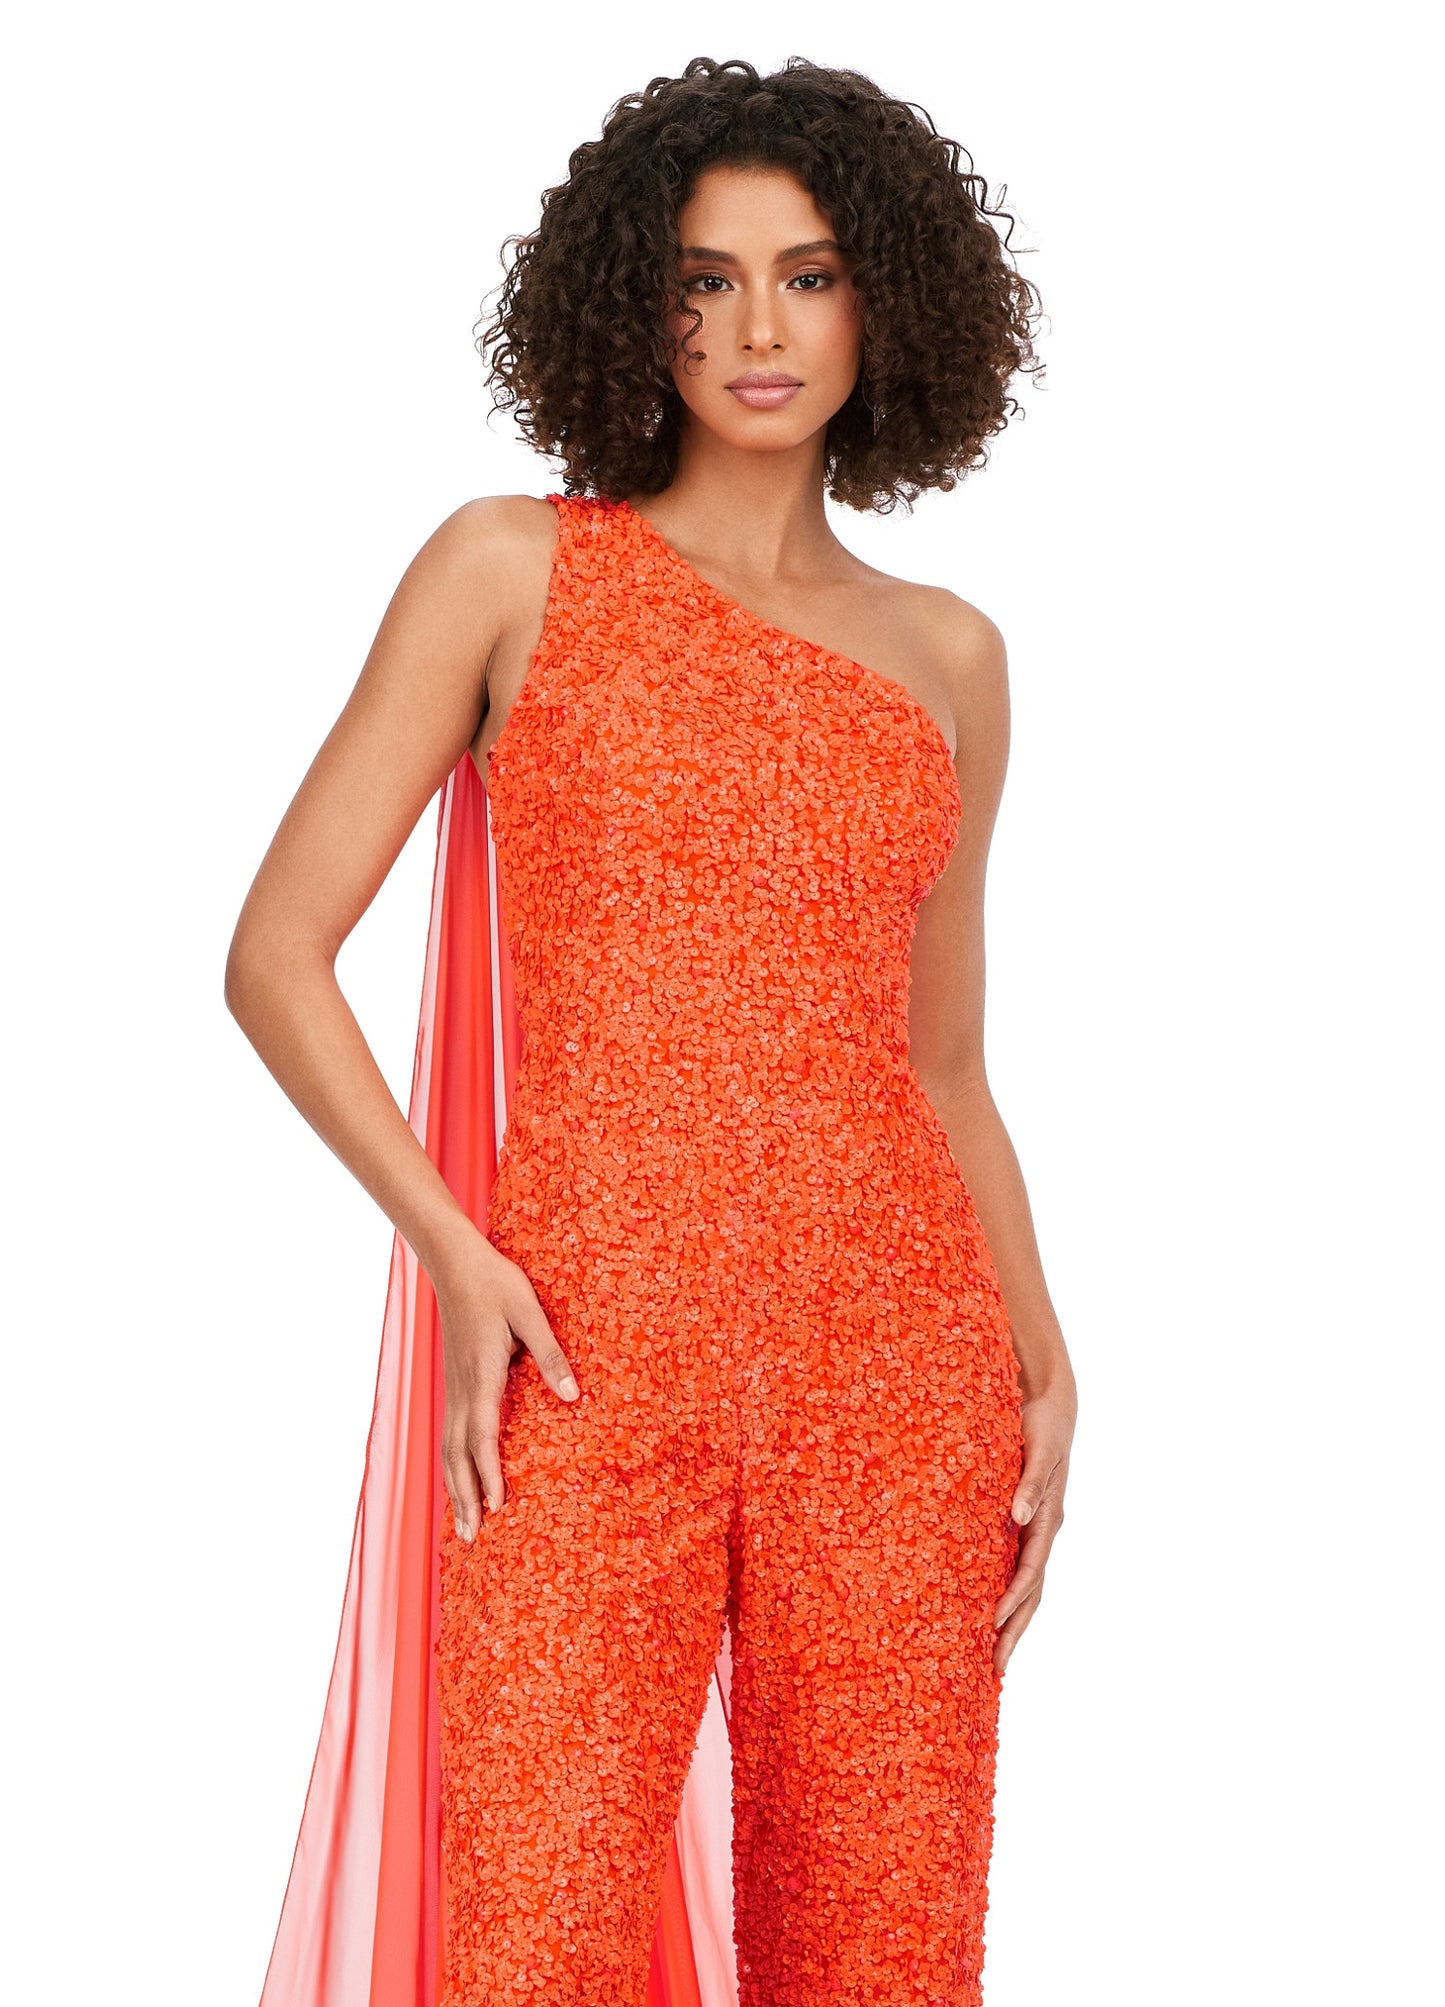 Ashley Lauren 11384 Fully Beaded With Removable Chiffon Cape One Shoulder Open Back Jumpsuit. Fall in love with this eye catching sequin jumpsuit! The one shoulder neckline is complete with a removable cape. The open back is adorned with sequin straps.